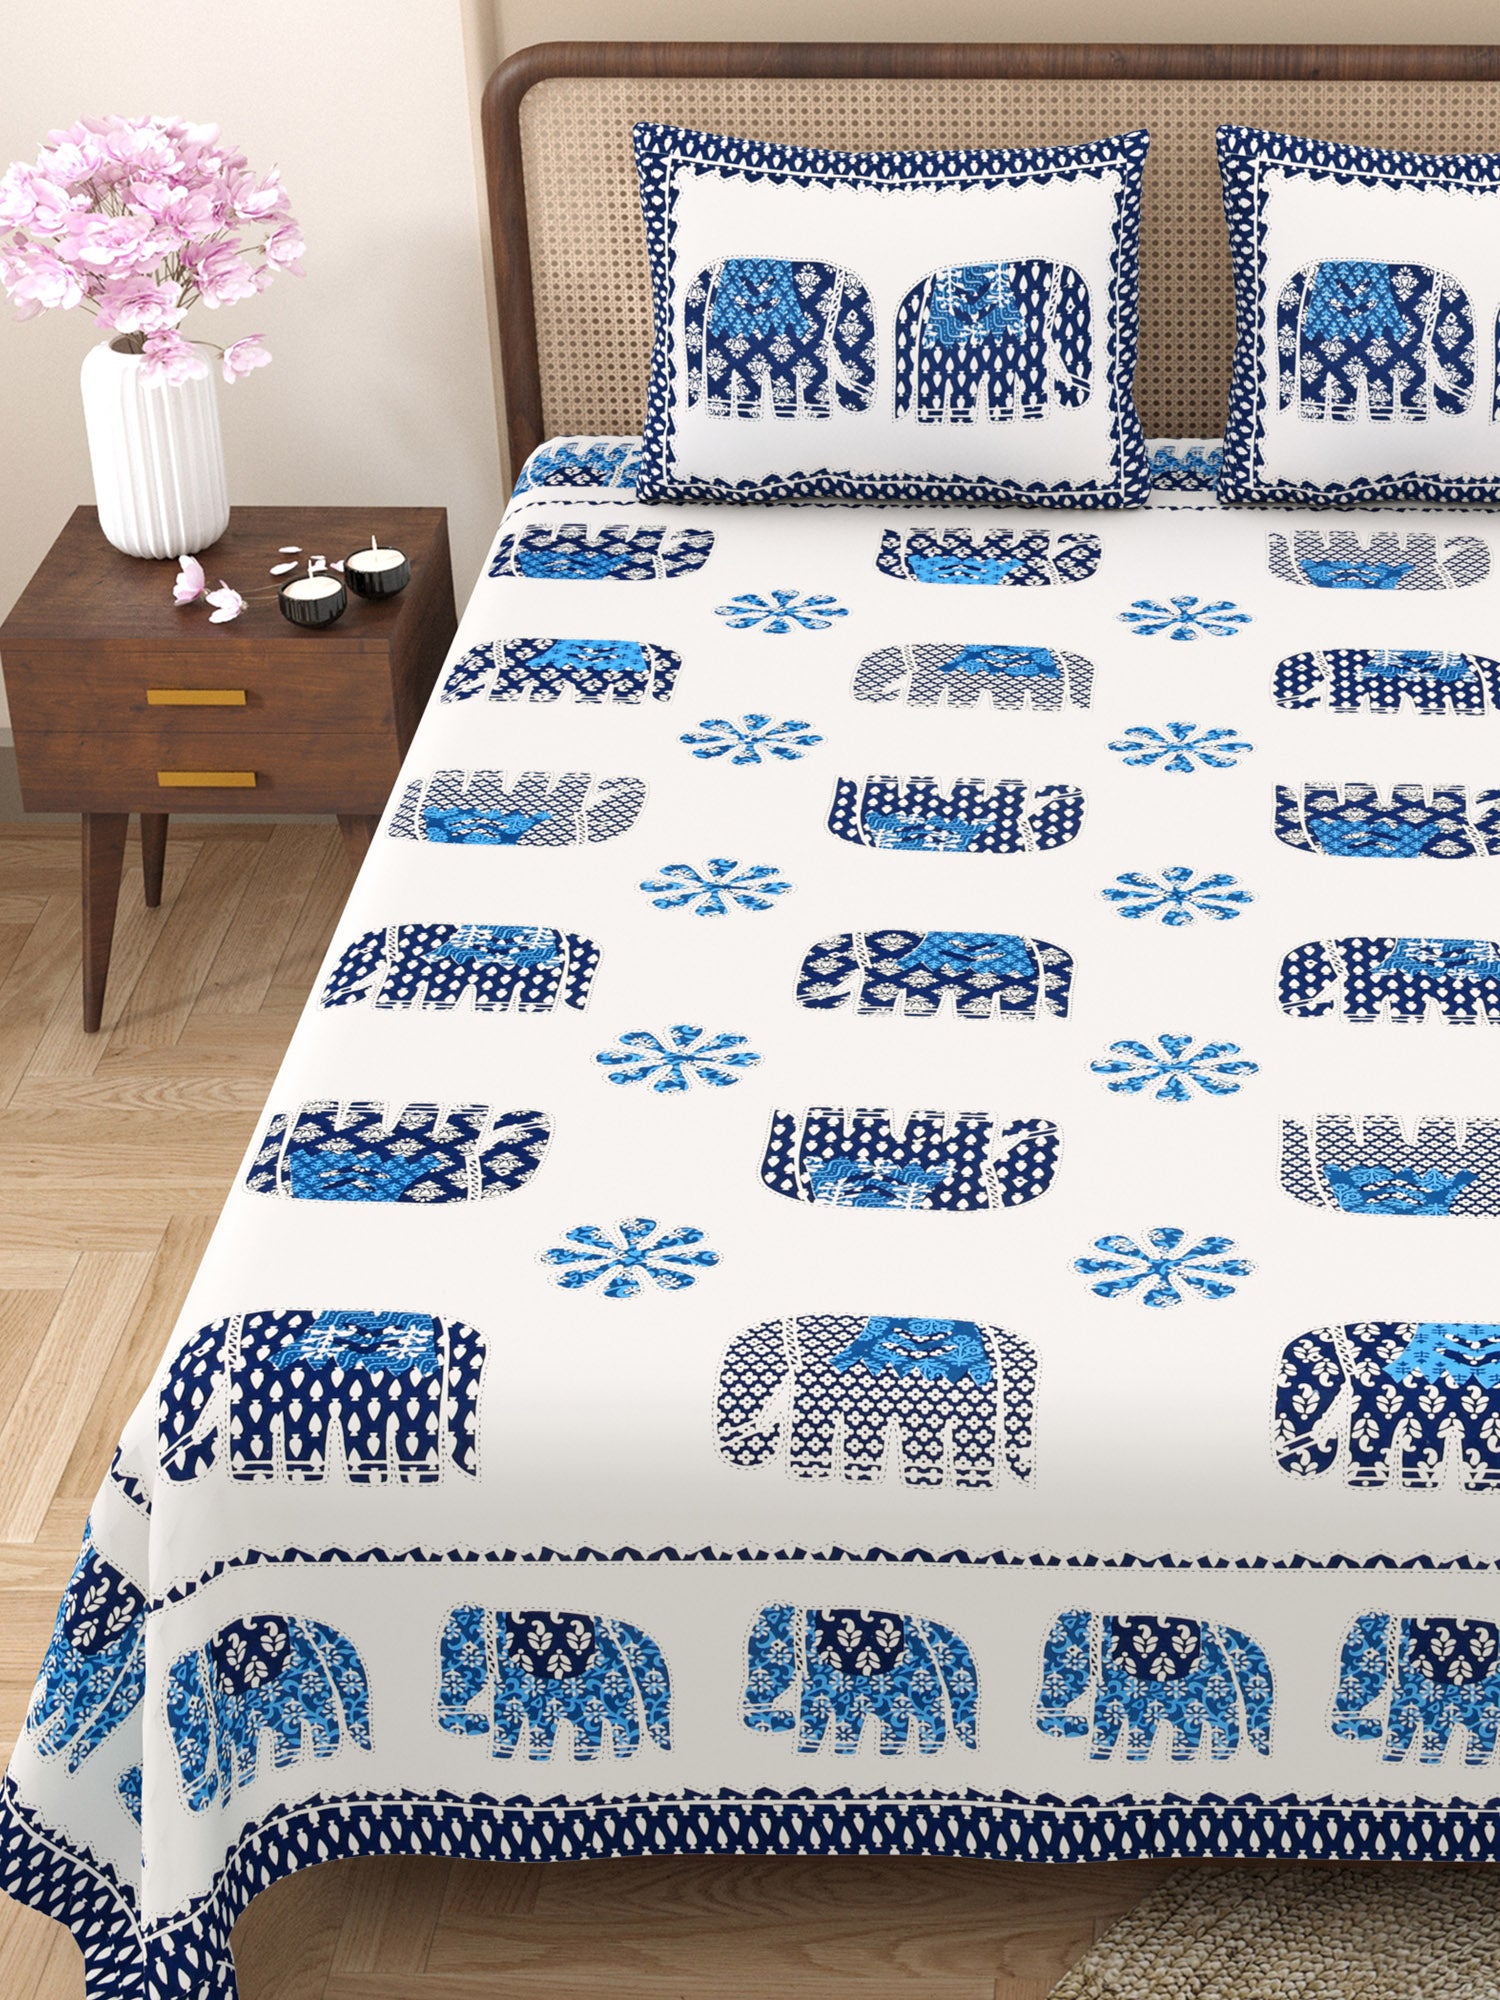 eCraftIndia Blue and White Cotton Elephant Printed 180TC King Size Double Bedsheet with 2 Pillow Covers 2